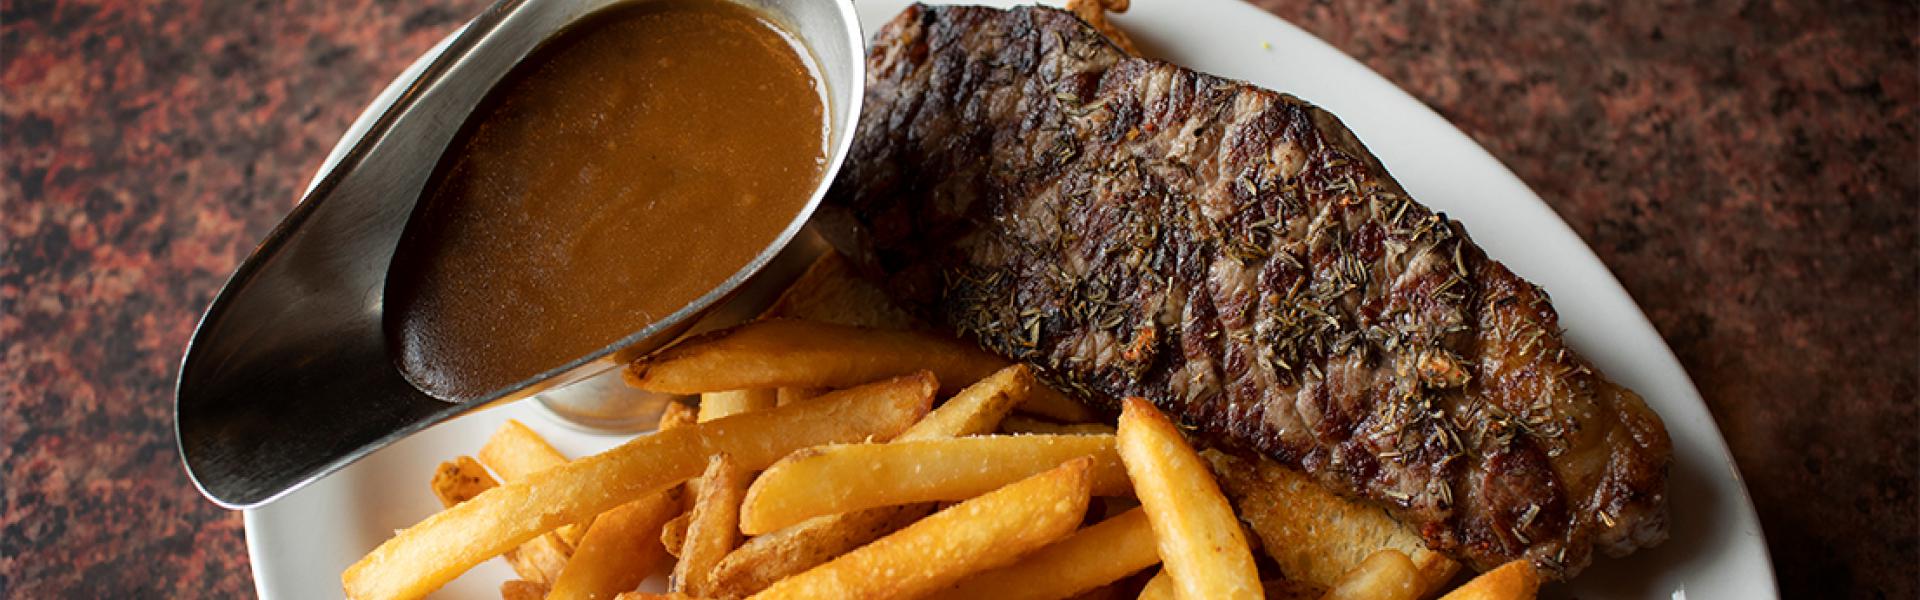 Plate of steak, fries and Barbeque sauce 